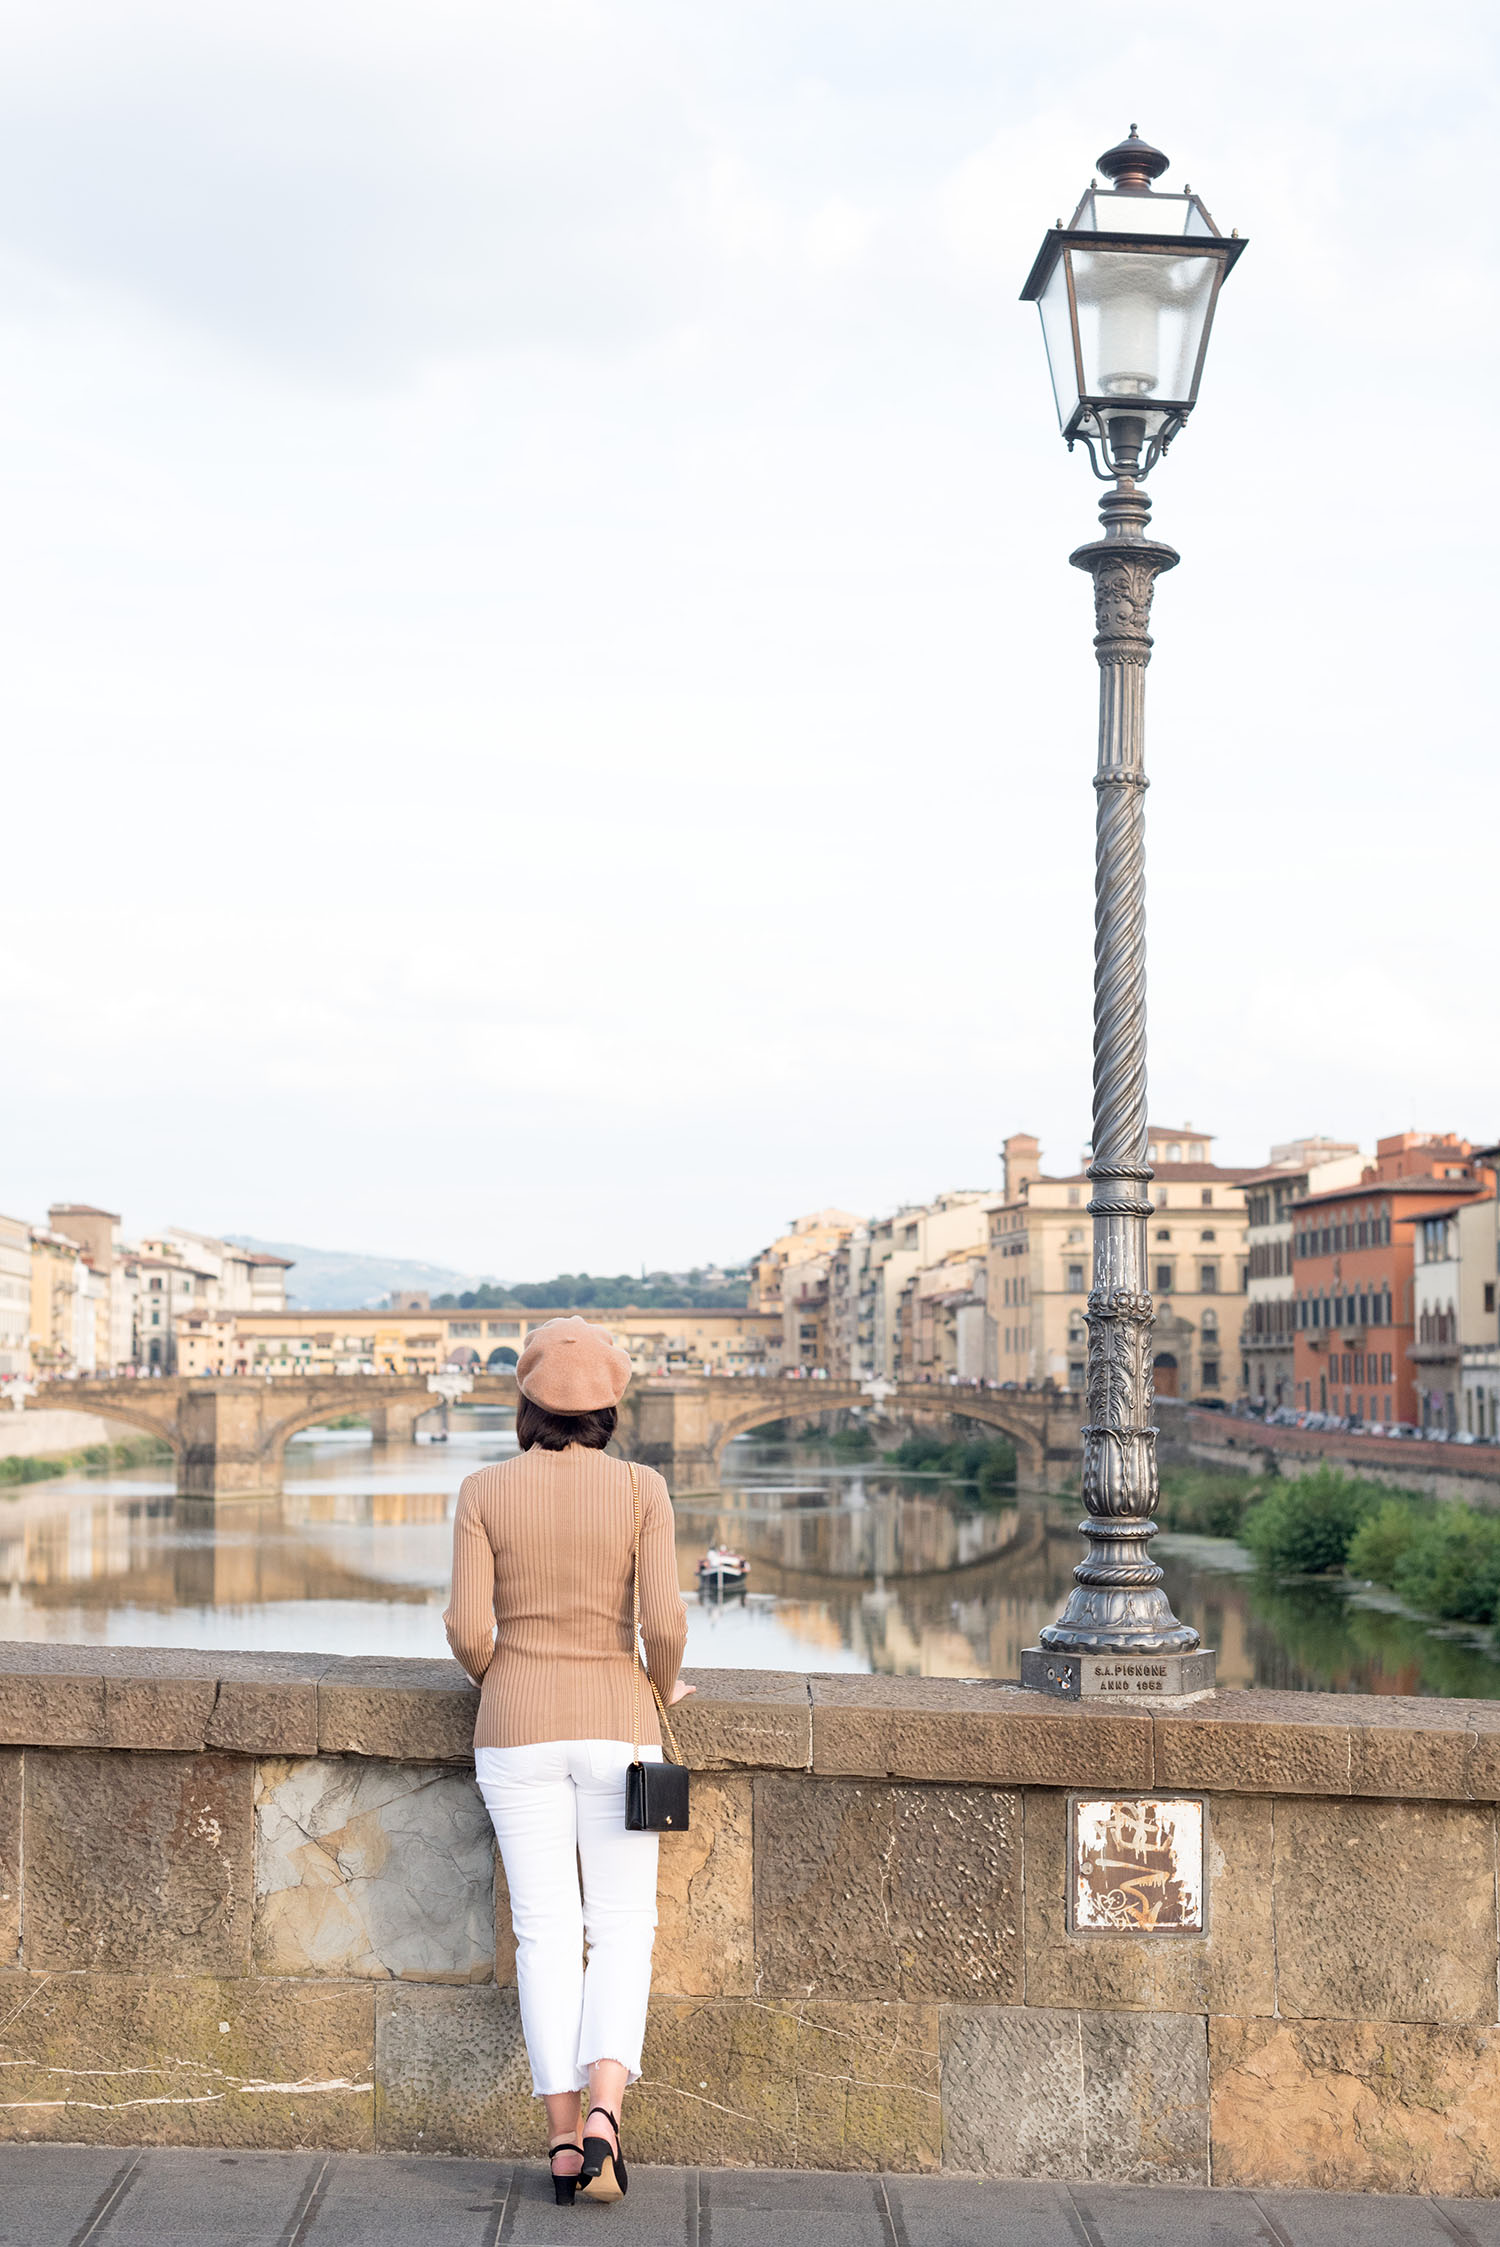 Top Winnipeg fashion blogger Cee Fardoe of Coco & Vera looks out over the Arno River in Florence, Italy, wearing white Mavi jeans and carrying a Gucci Marmont handbag